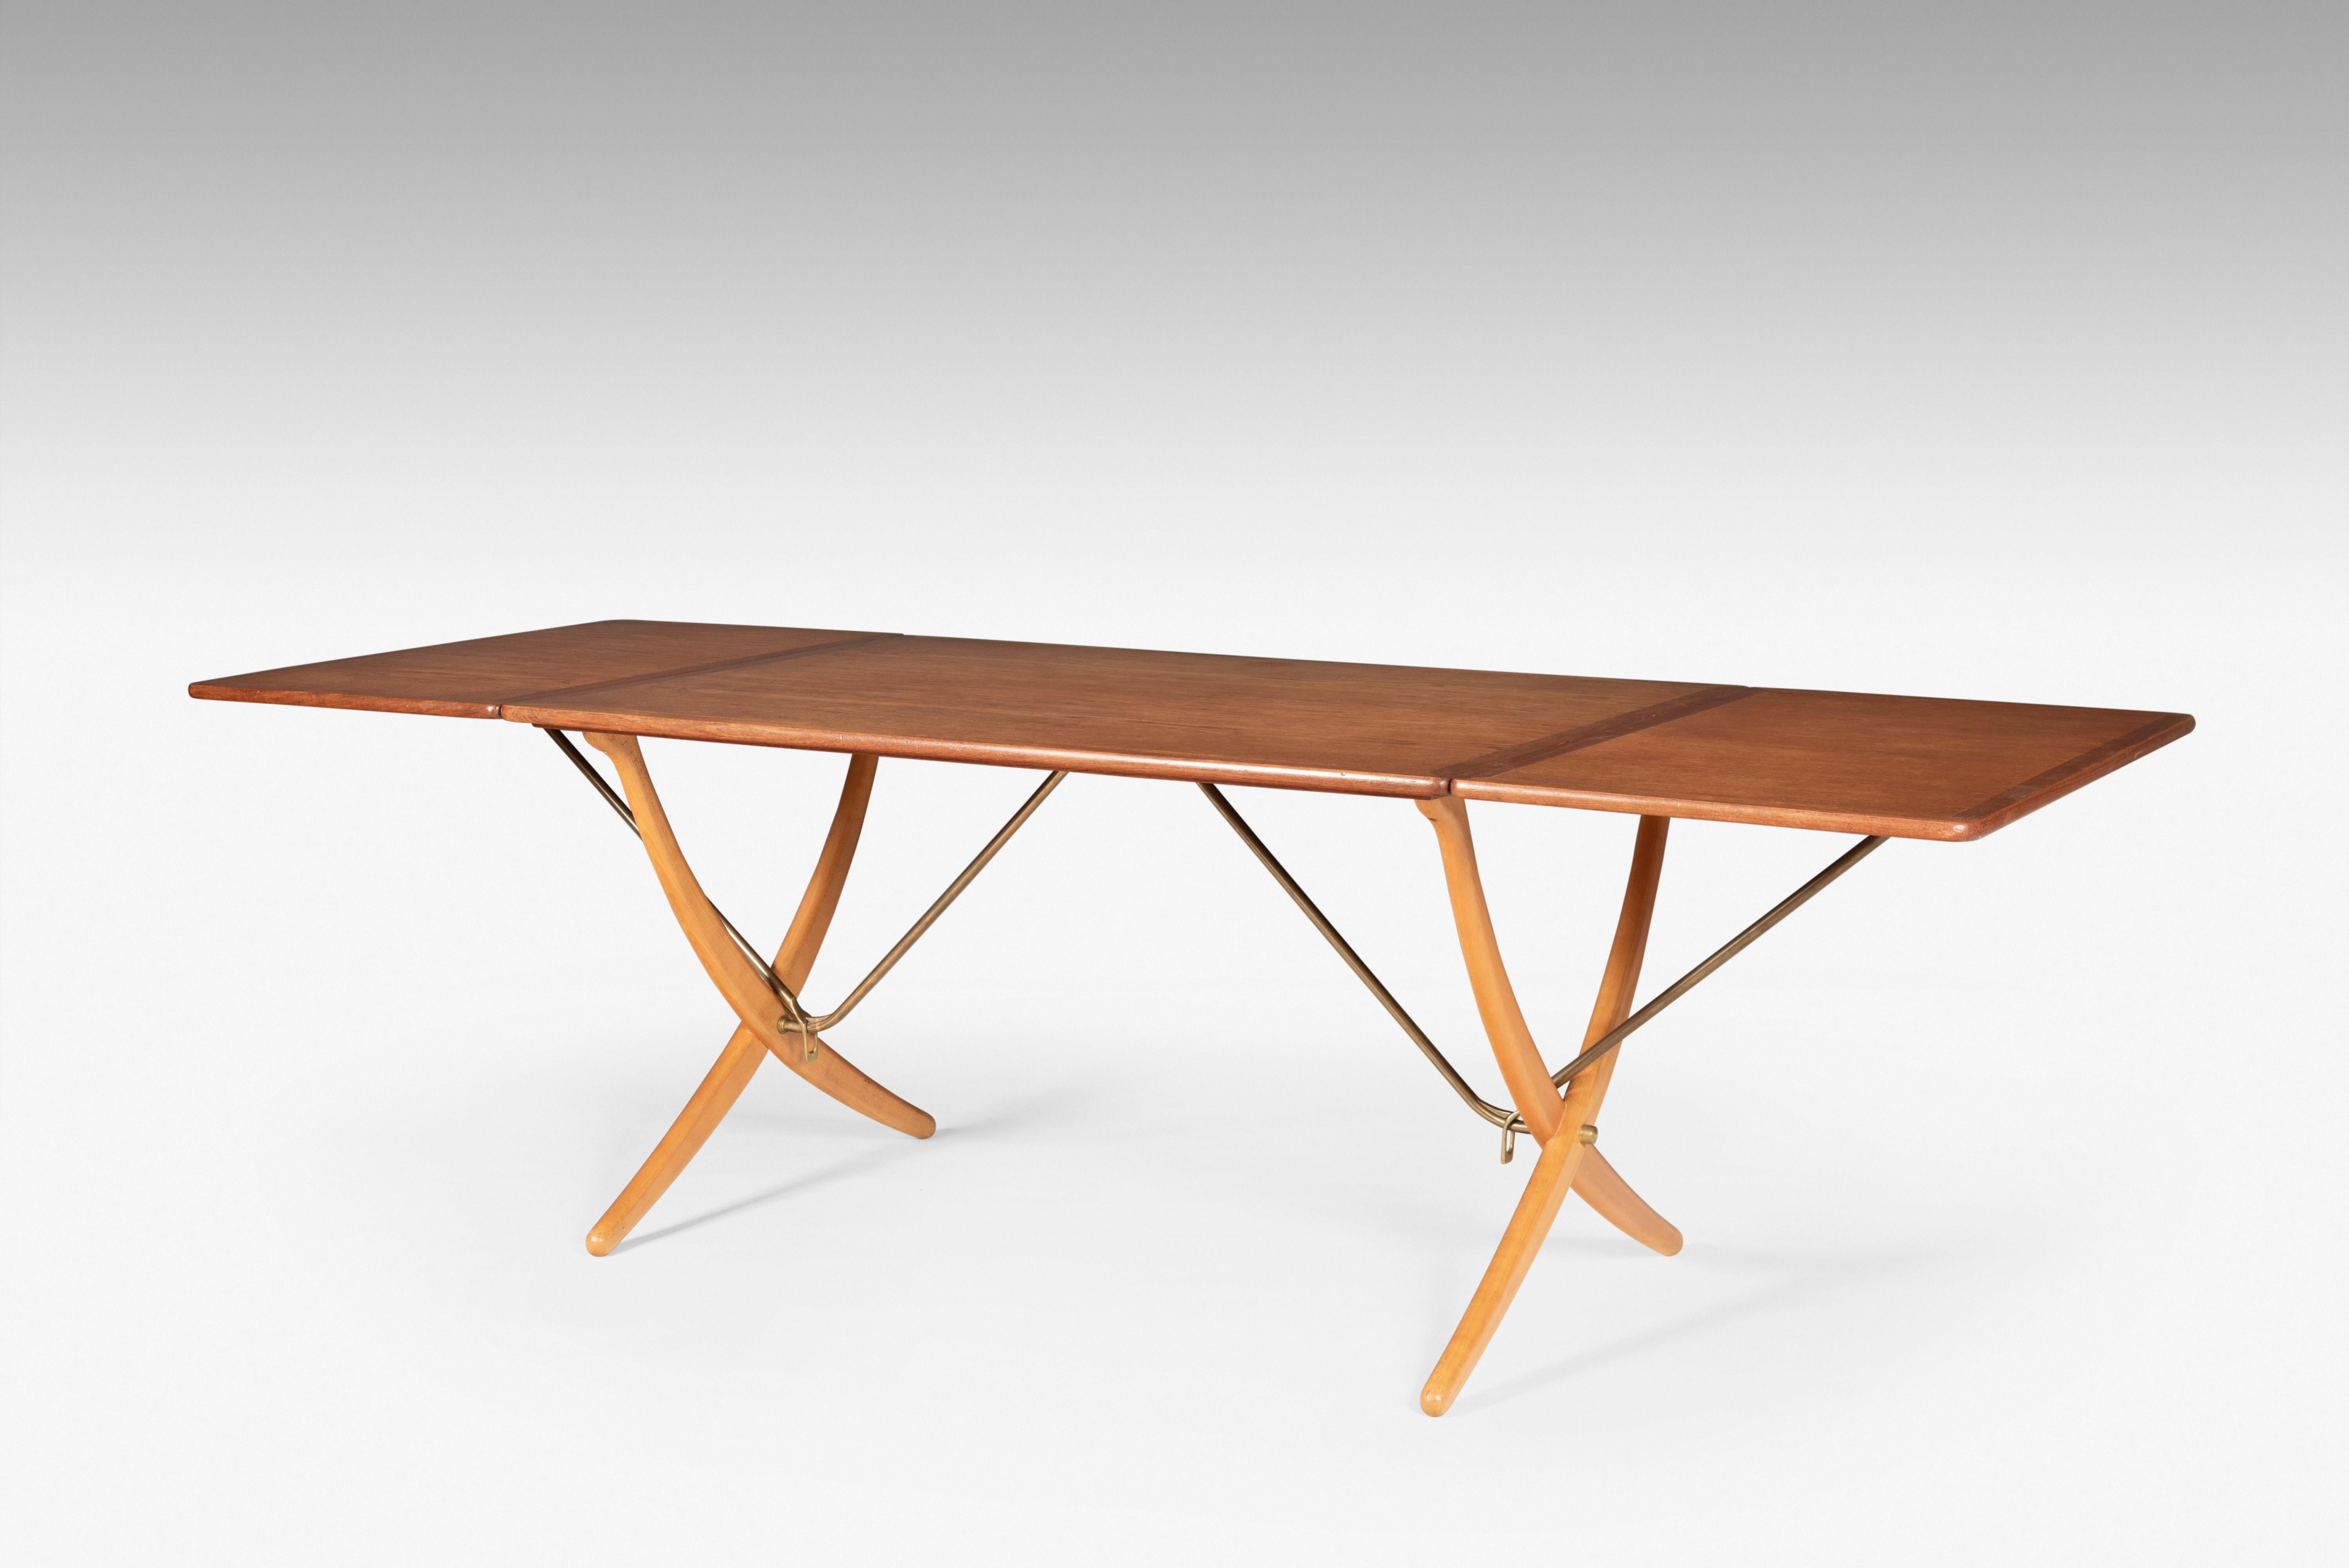 This is a rare and early all oak Hans J. Wegner dining table AT-304 with two drop-leaves, cross-legs and stretchers of brass. Designed by Wegner 1950 and manufactured by cabinetmaker Andreas Tuck in Denmark.
Overall width when fully open is 240 cm